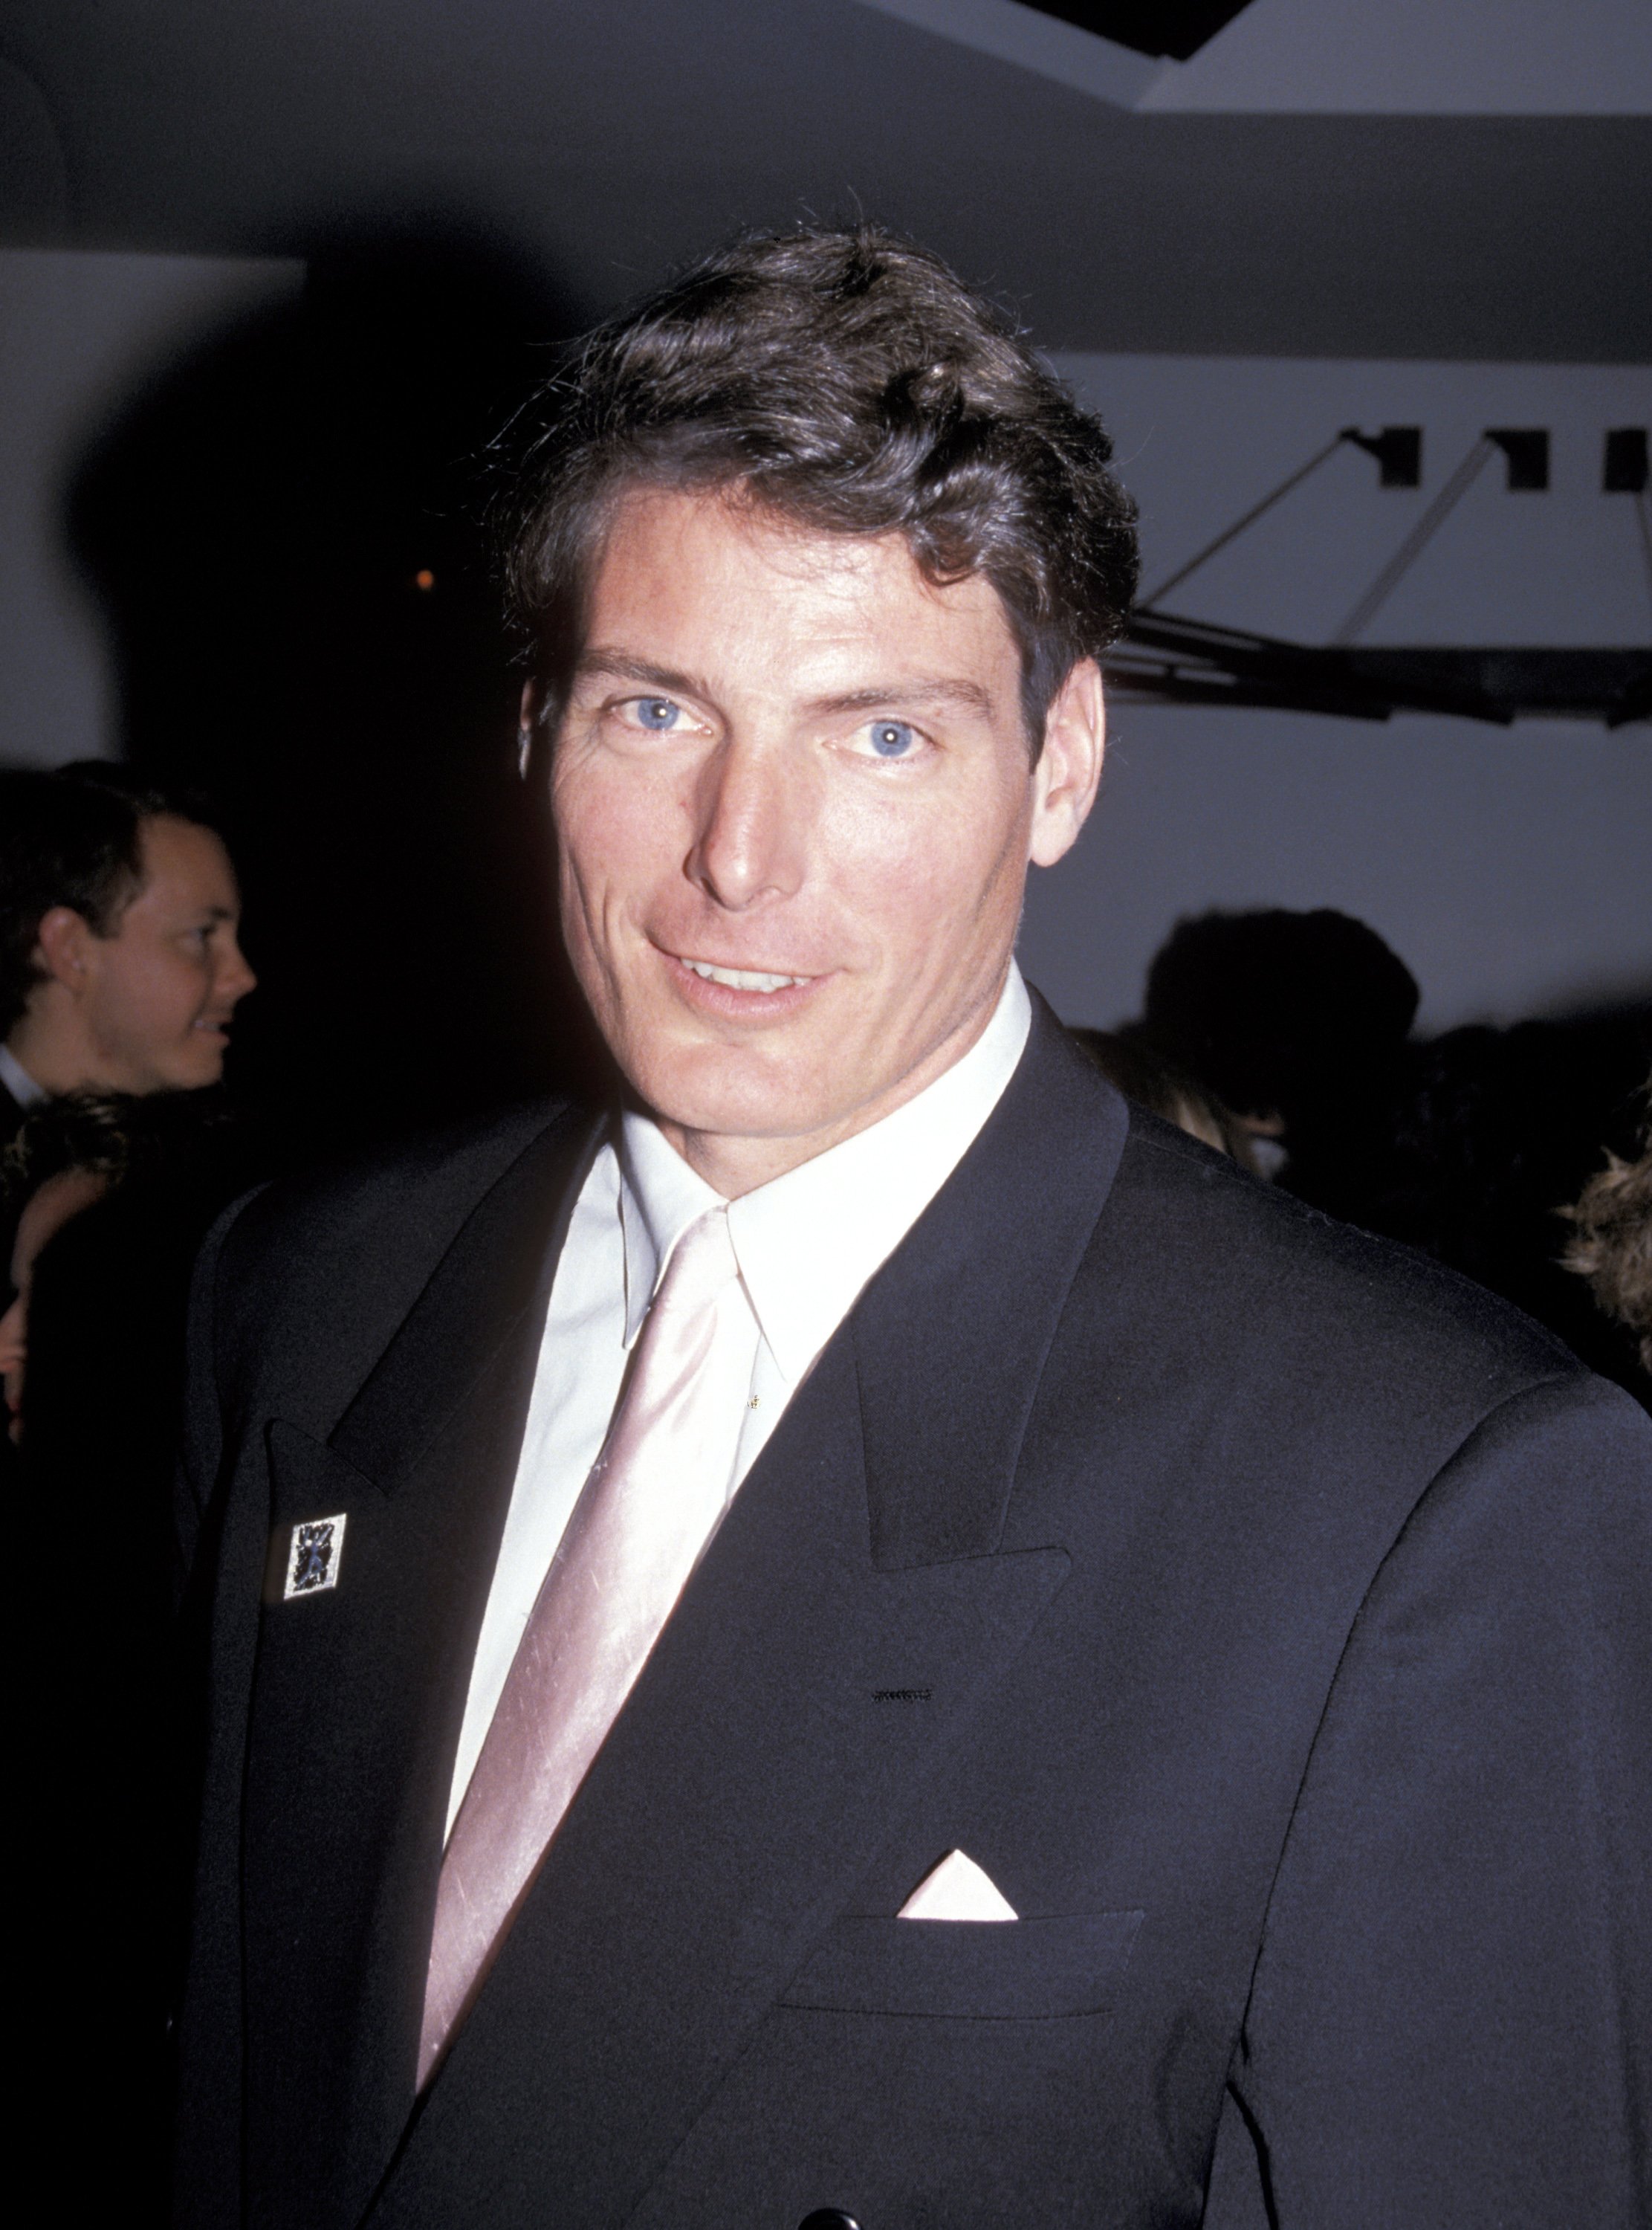 Christopher Reeve at The 63rd Annual Academy Awards on March 25, 1991 | Source: Getty Images